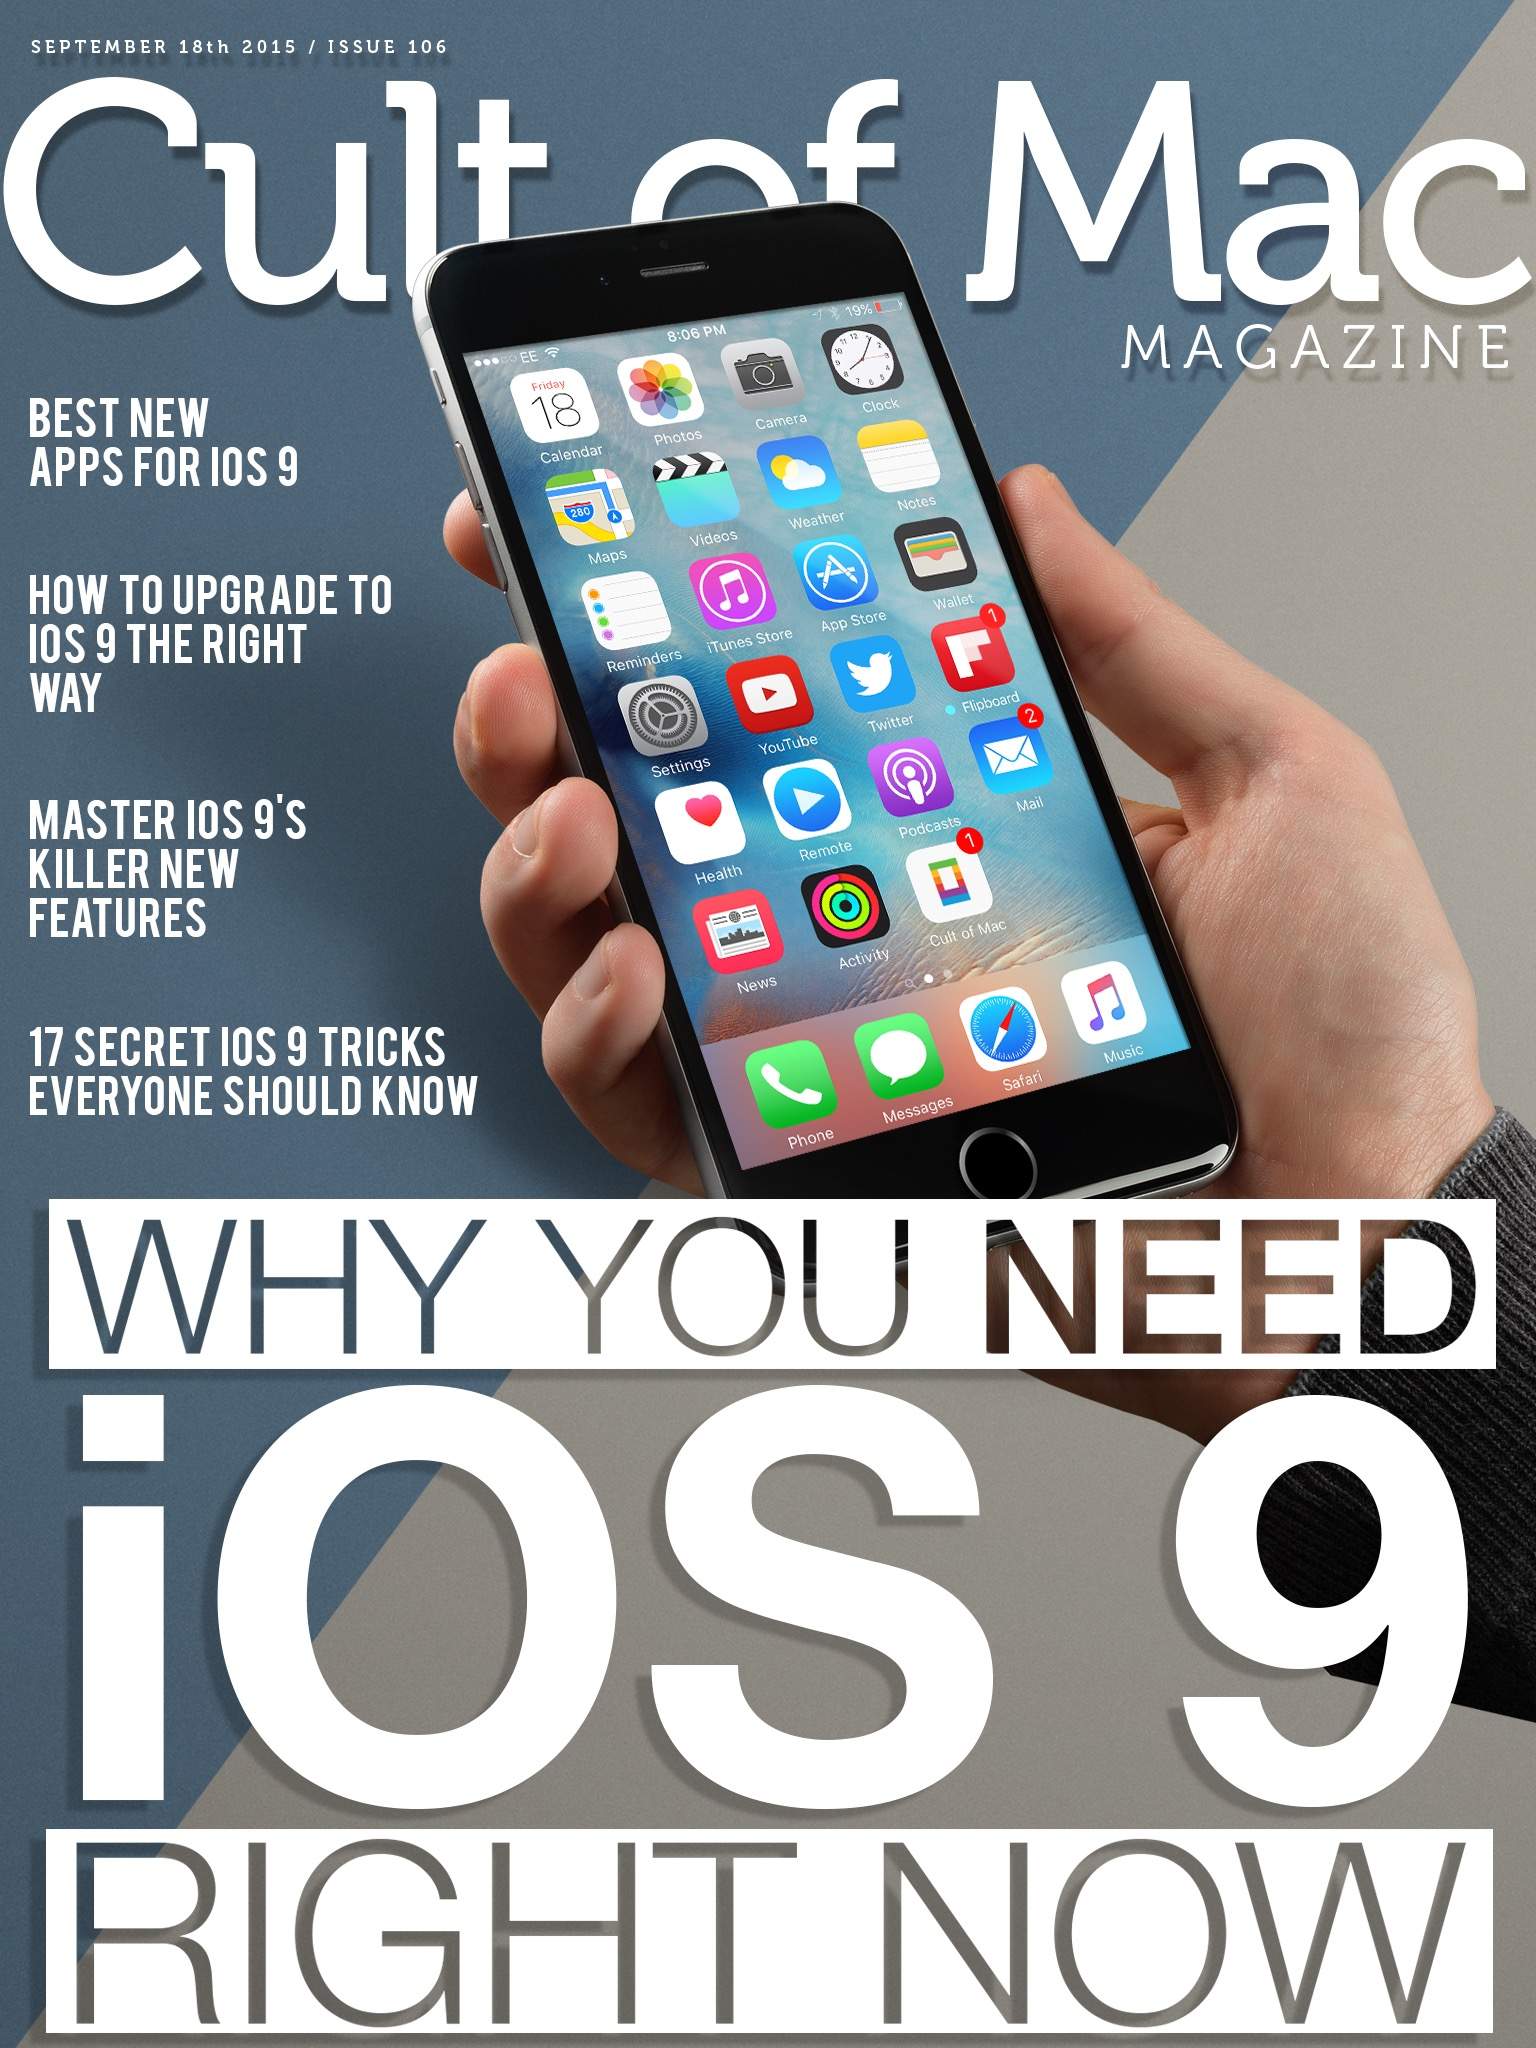 More iOS 9 news and reviews than you can handle!